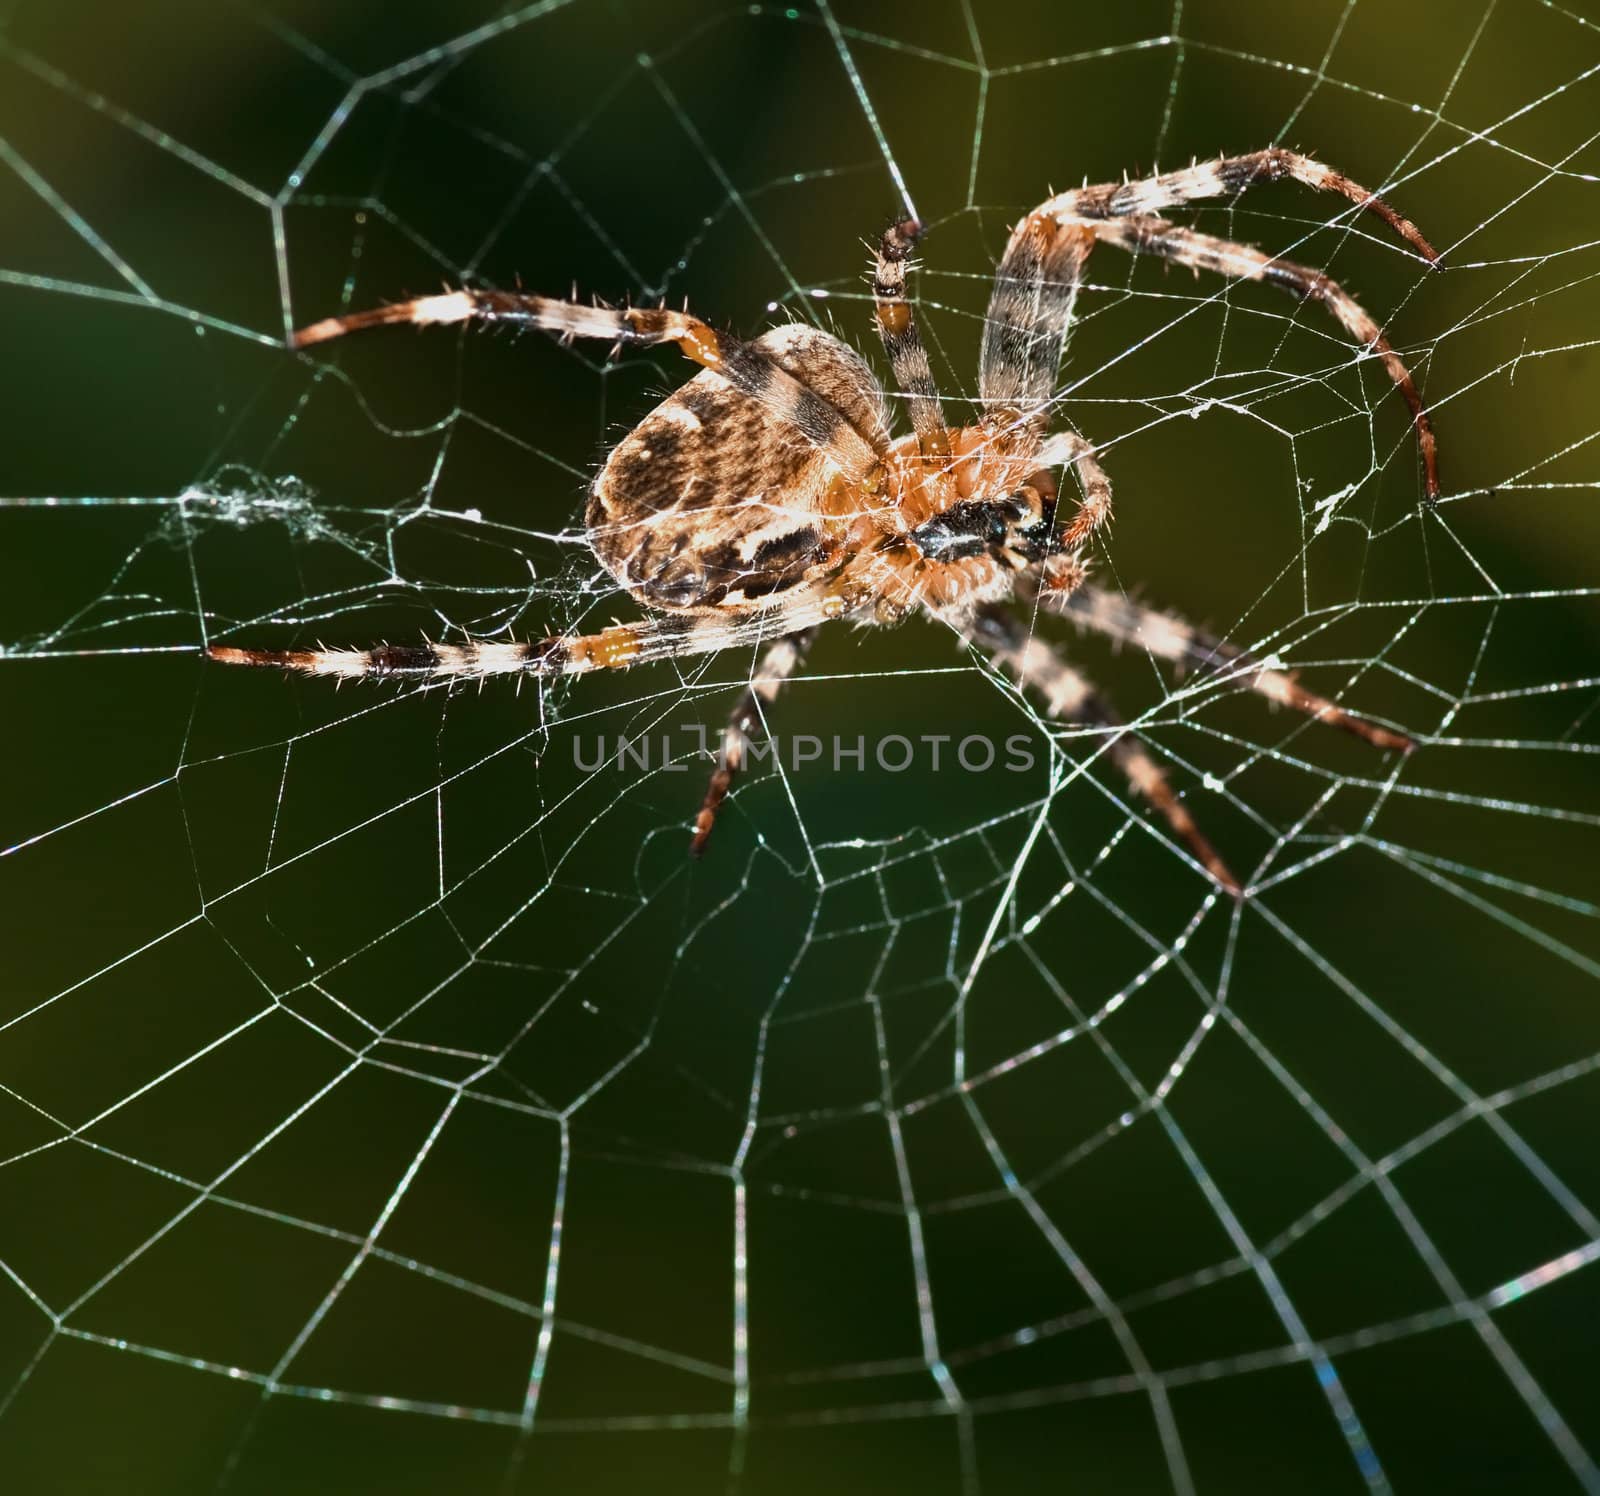 Spider in web by michelloiselle